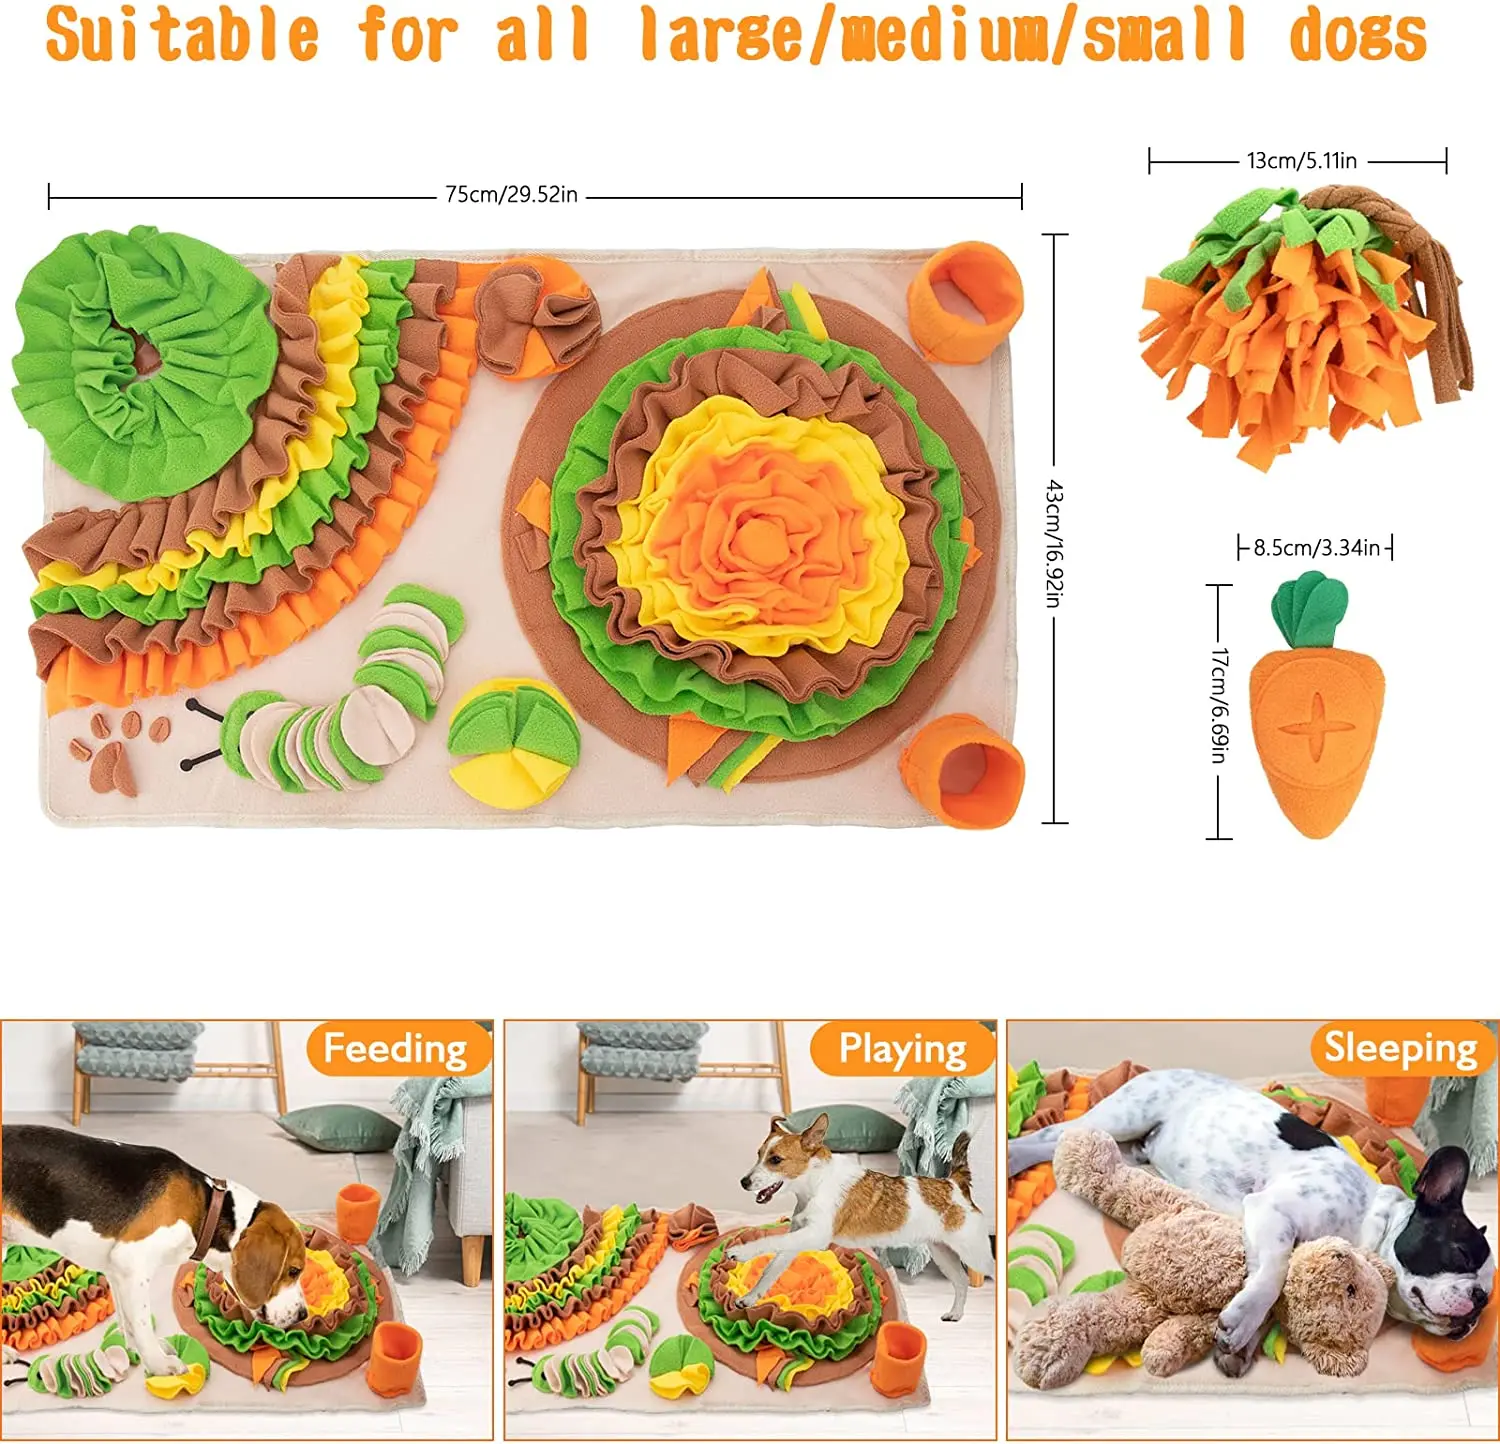 Snuffle-Mat-For-Dogs-Feeding-Mats-Sniffpad-Nosework-Mat-Food-Hidden-Dog-Training-Blanket-Toy-for.jpg